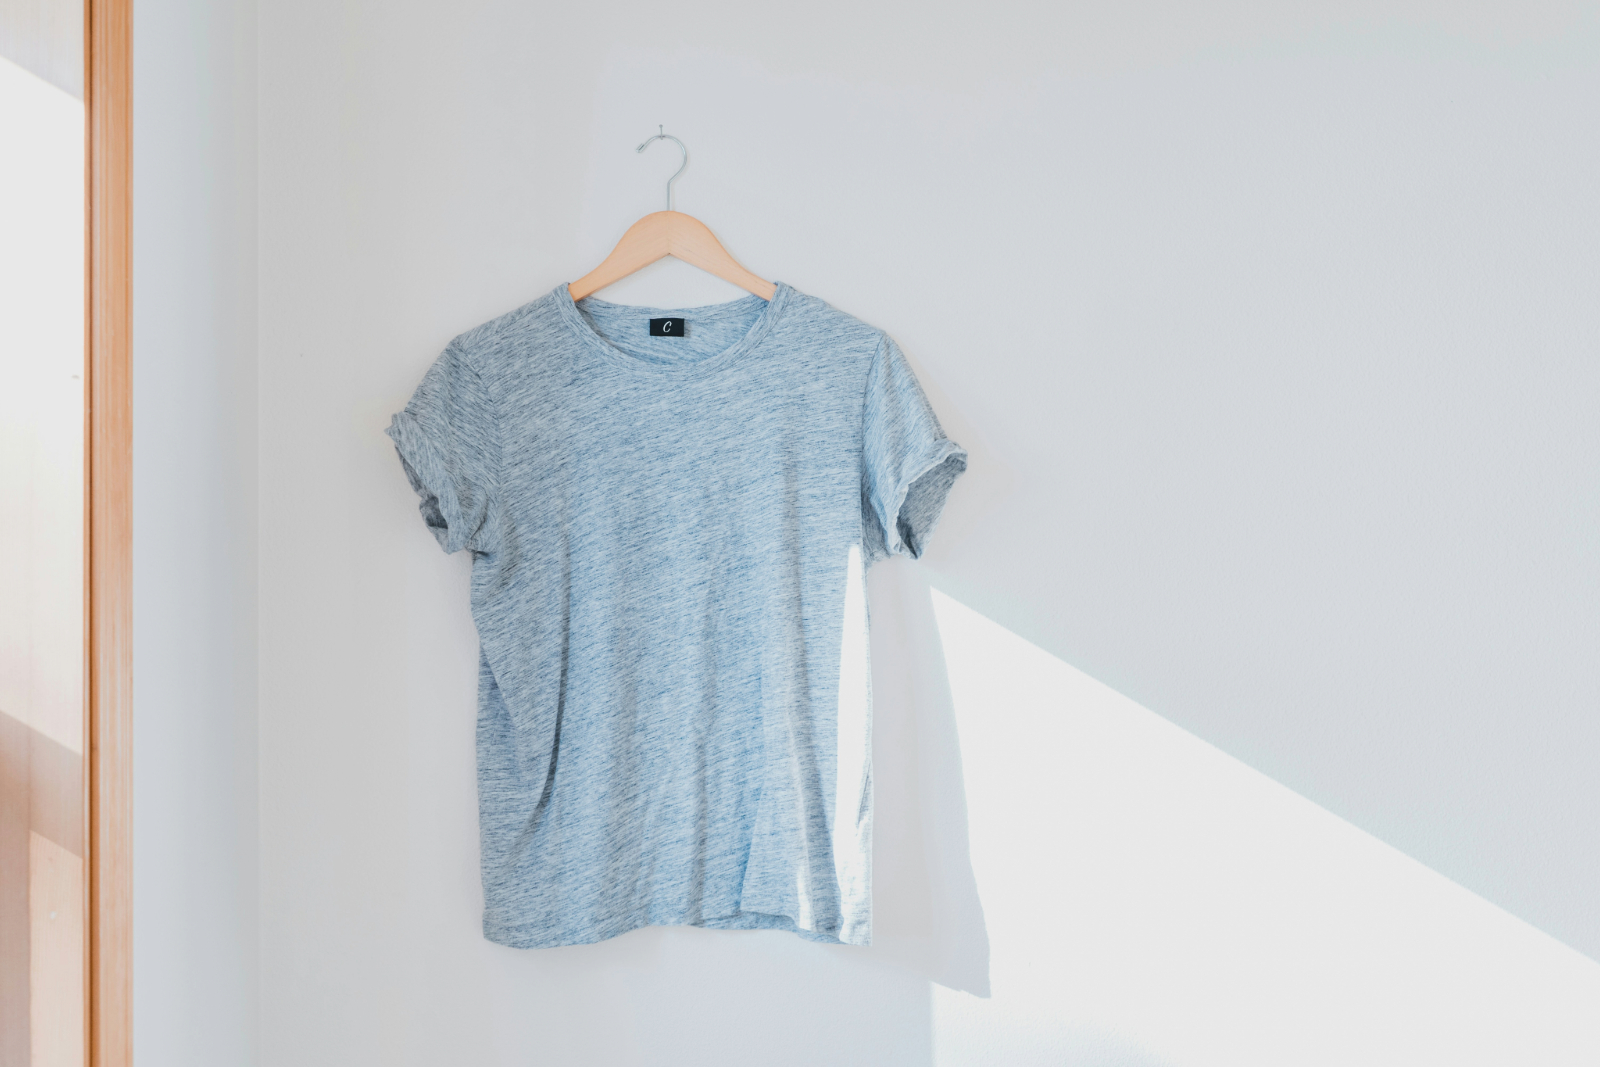 A light blue t-shirt hanging on a hanger against a white wall.